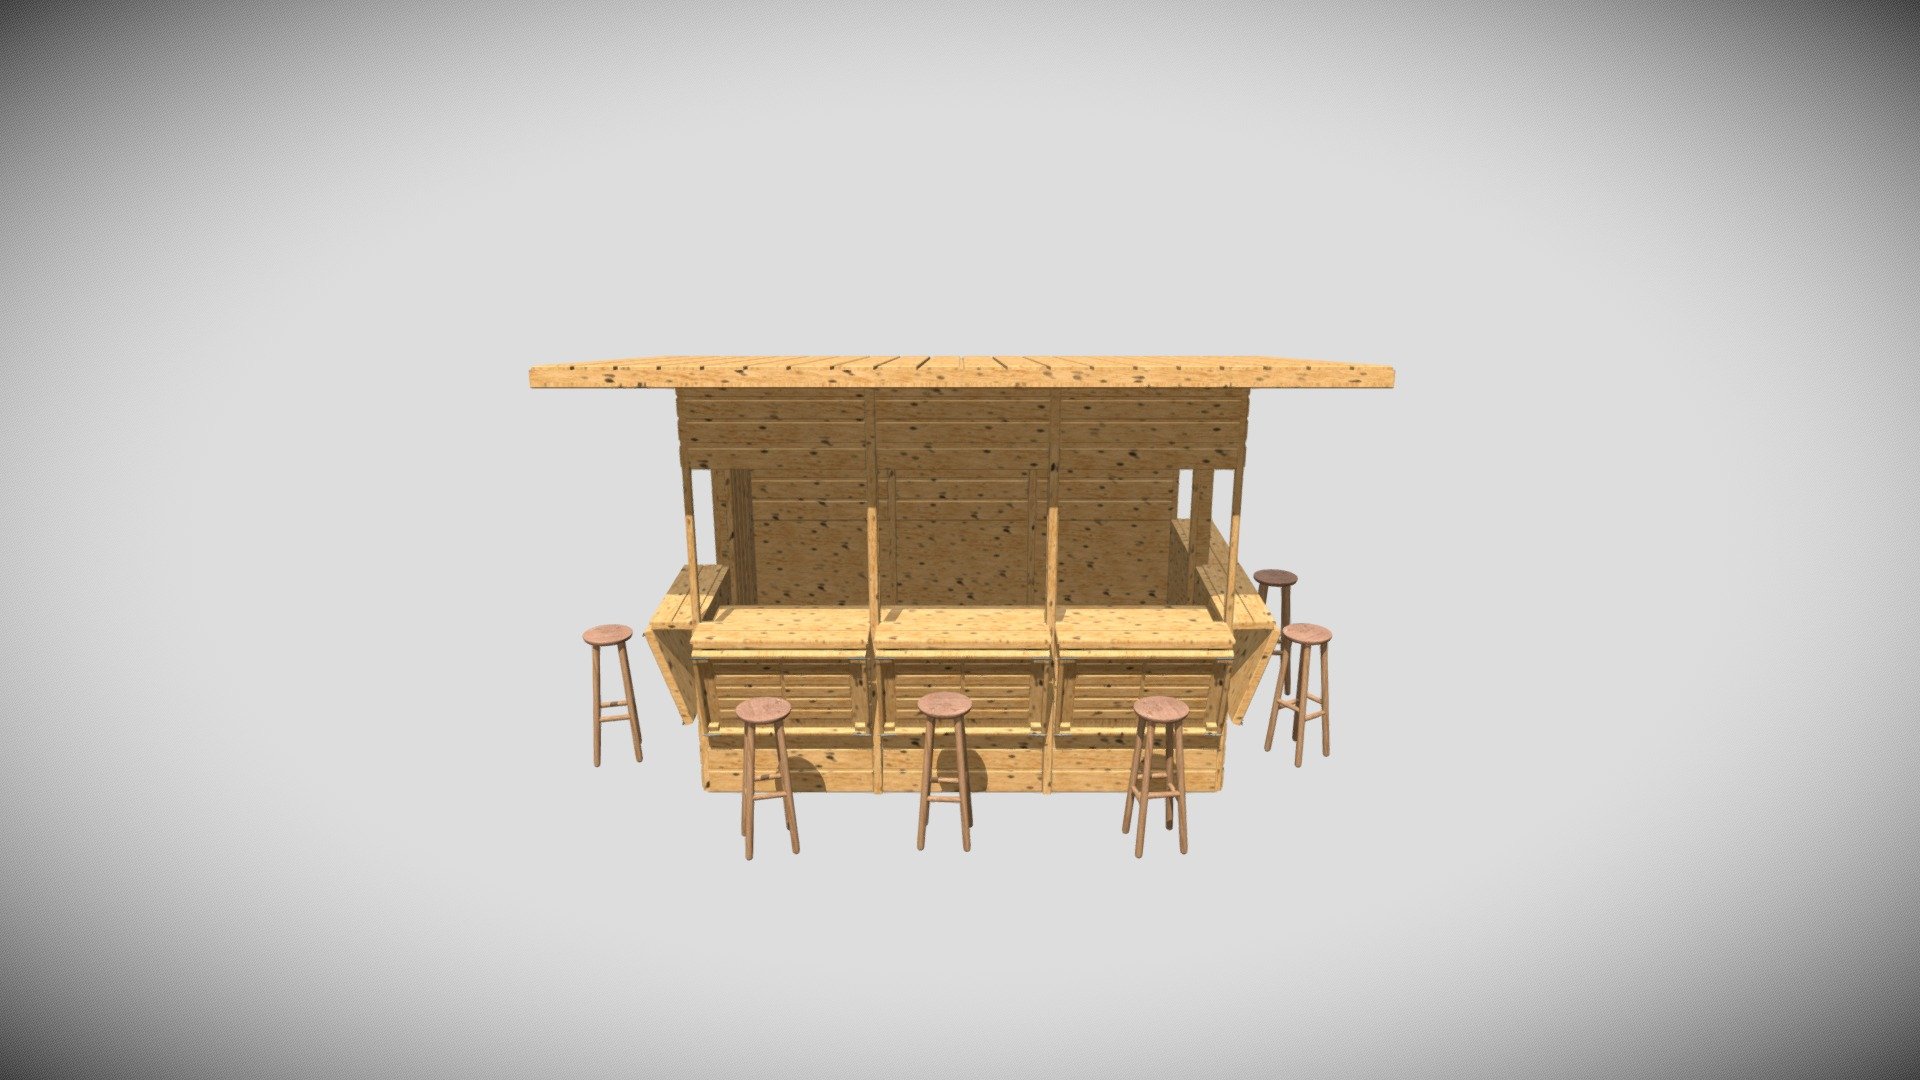 3D model of a wooden vending stand, also known as kiosk. The structure can also serve as a small bar (stools included).
Created in Blender. 
Whole model is textured, with fully unwrapped UVs. 4096x4096 PNG texture maps are provided (color, roughness, normal, metallic).
Model consists of 8014 faces and 8636 vertices 3d model